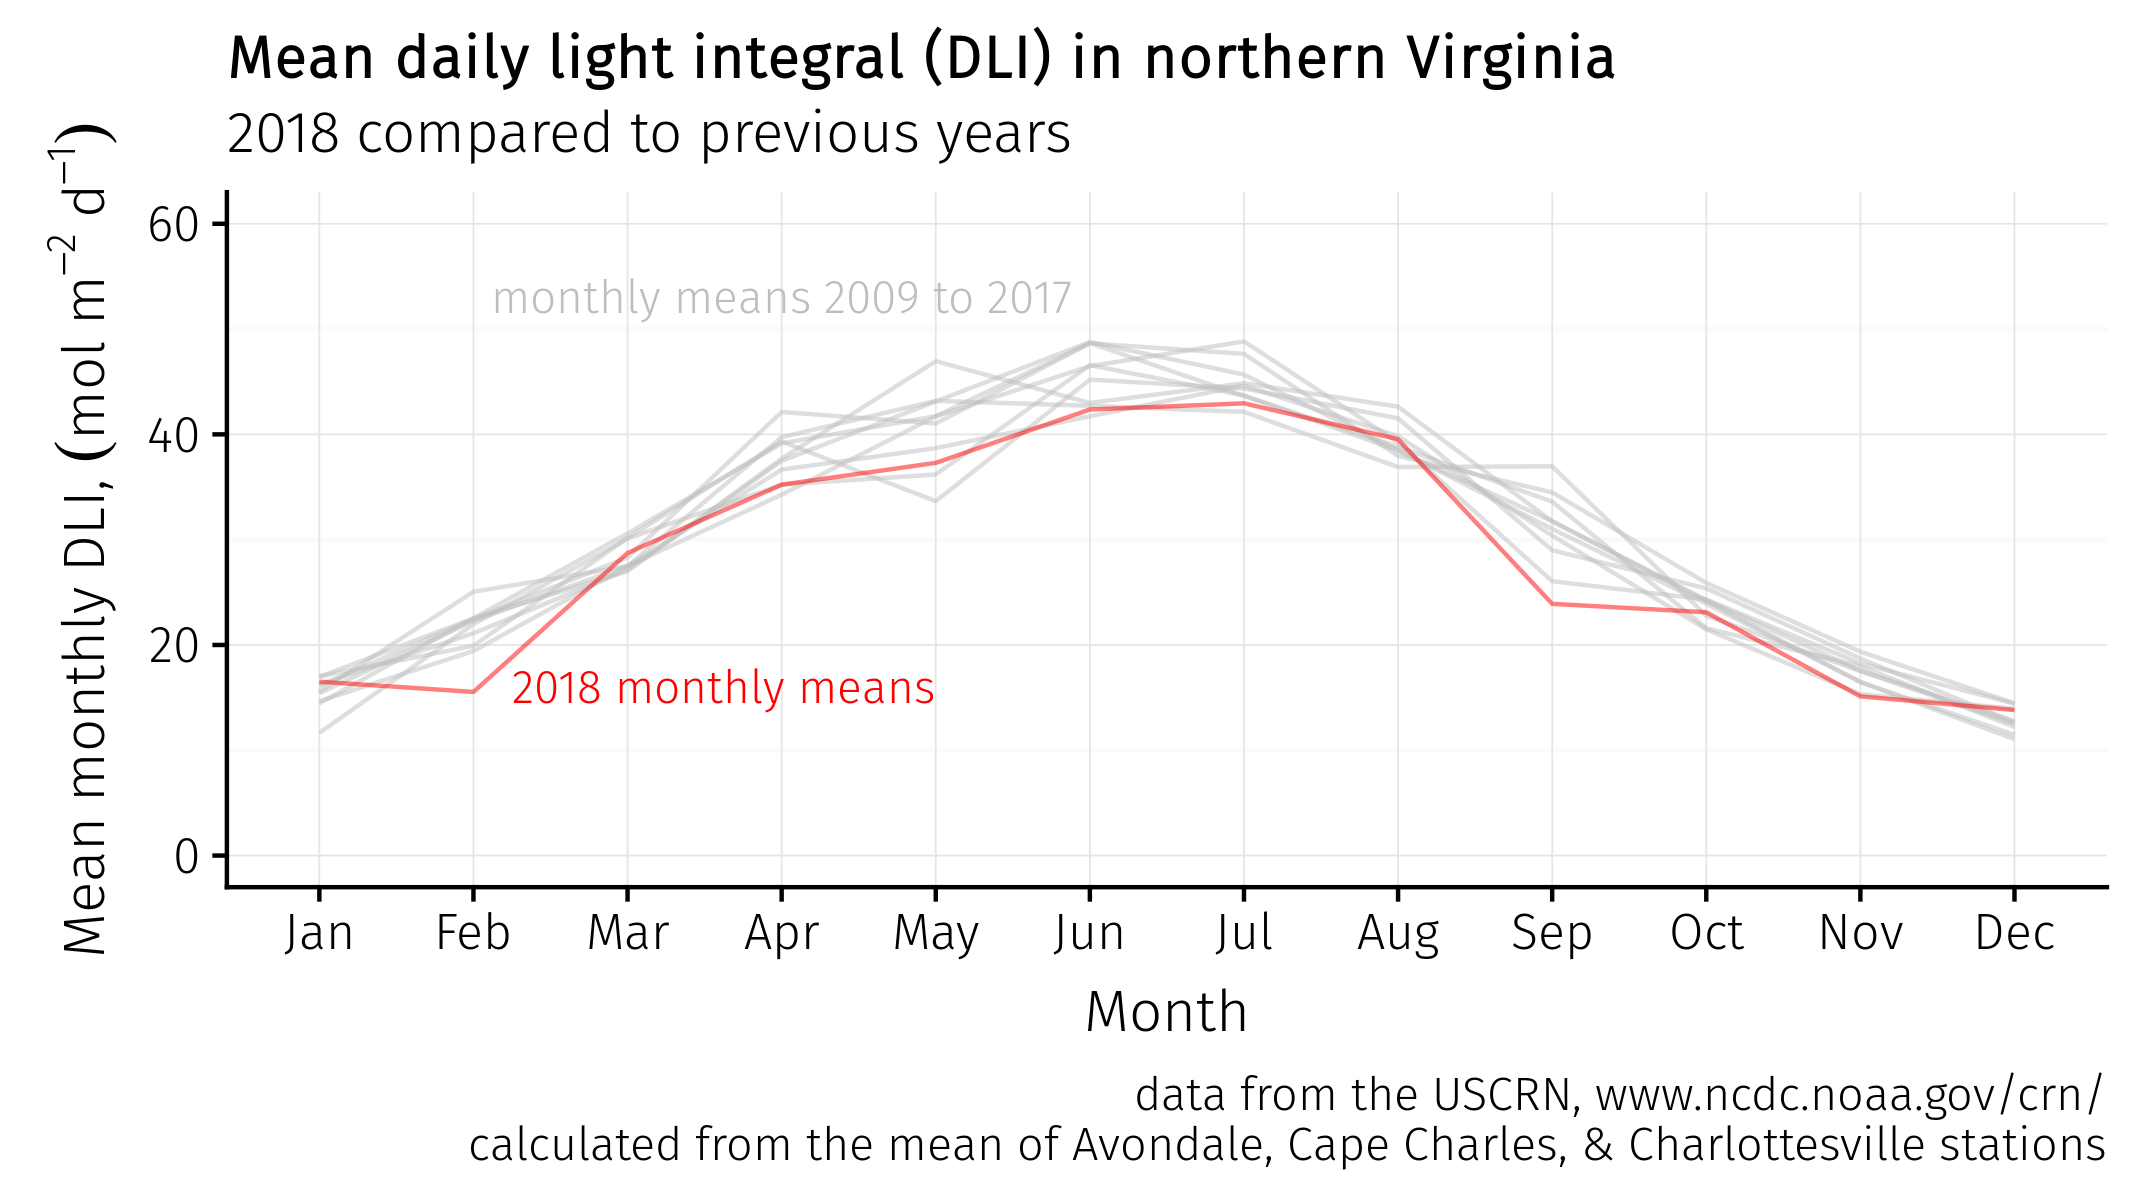 northern virginia dli and lines for past decade